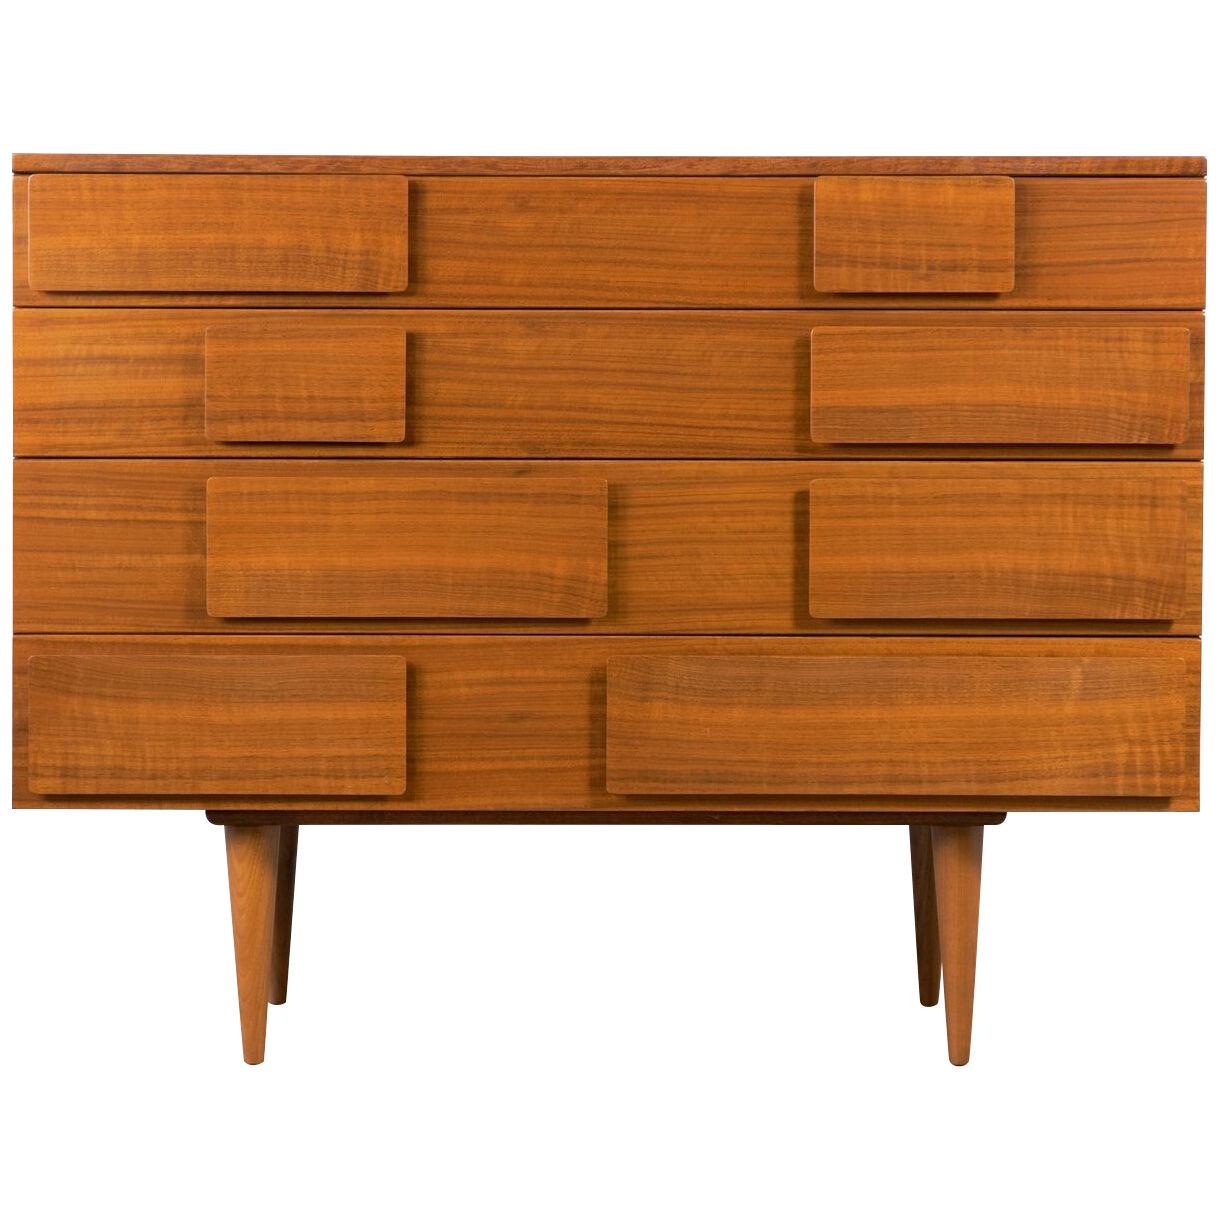 Four Drawer Dresser by Gio Ponti for Singer & Sons